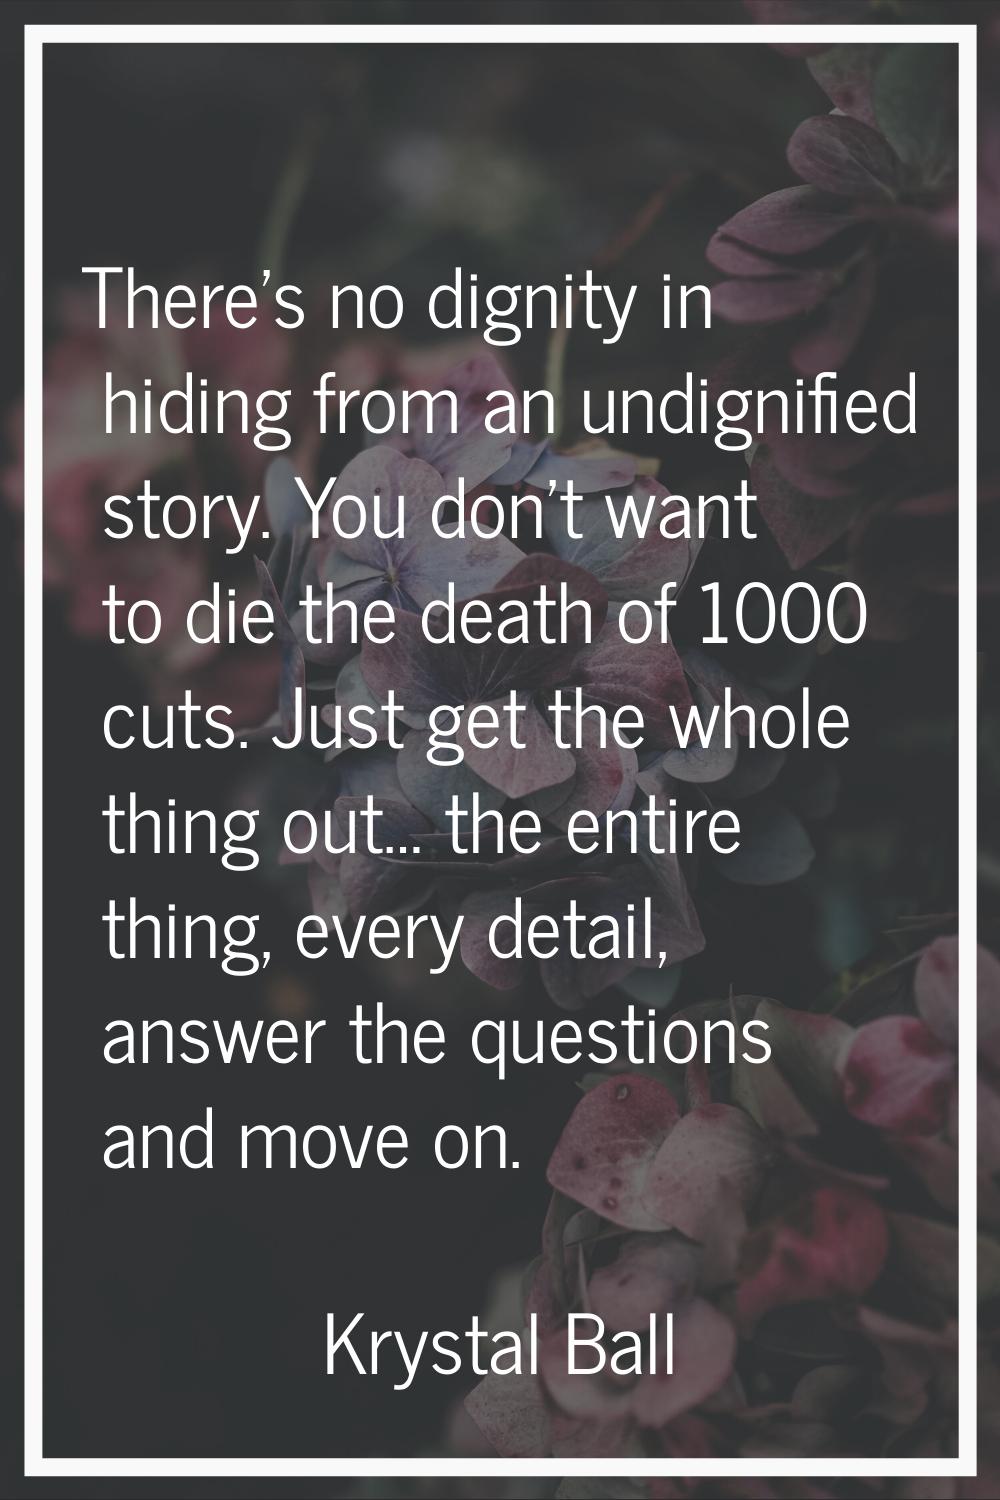 There's no dignity in hiding from an undignified story. You don't want to die the death of 1000 cut